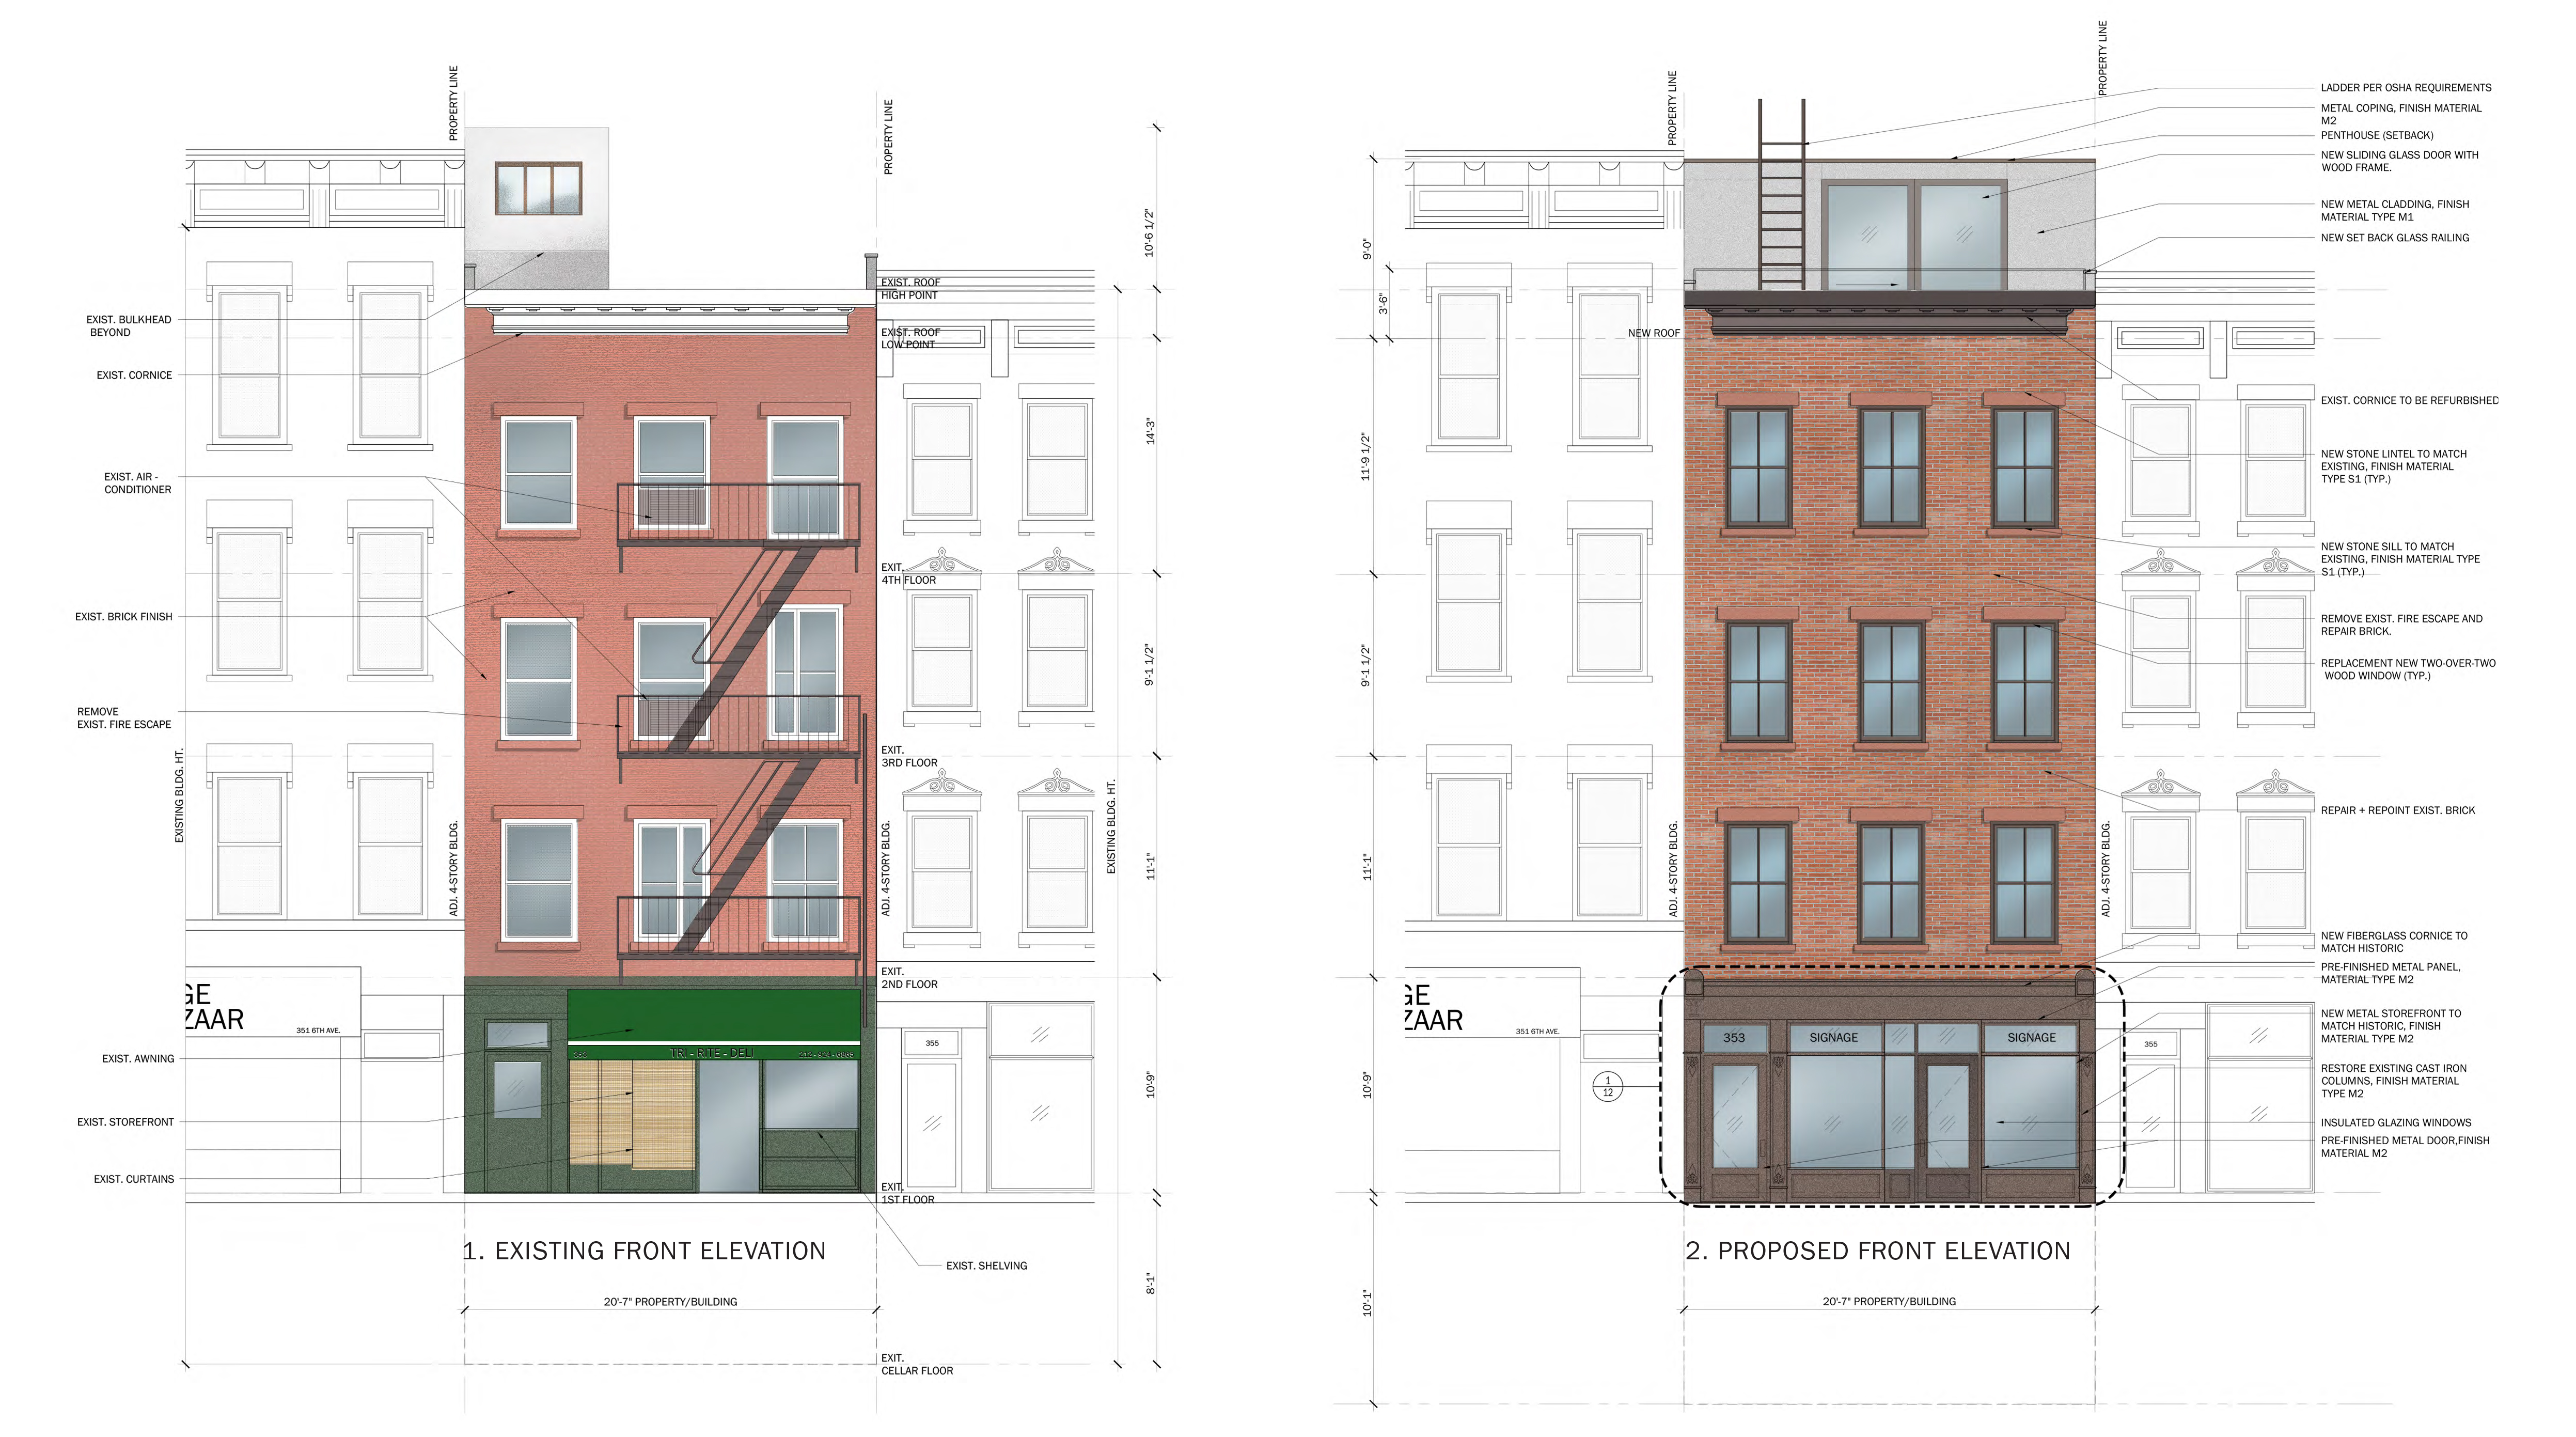 353 Sixth Avenue, existing and proposed front